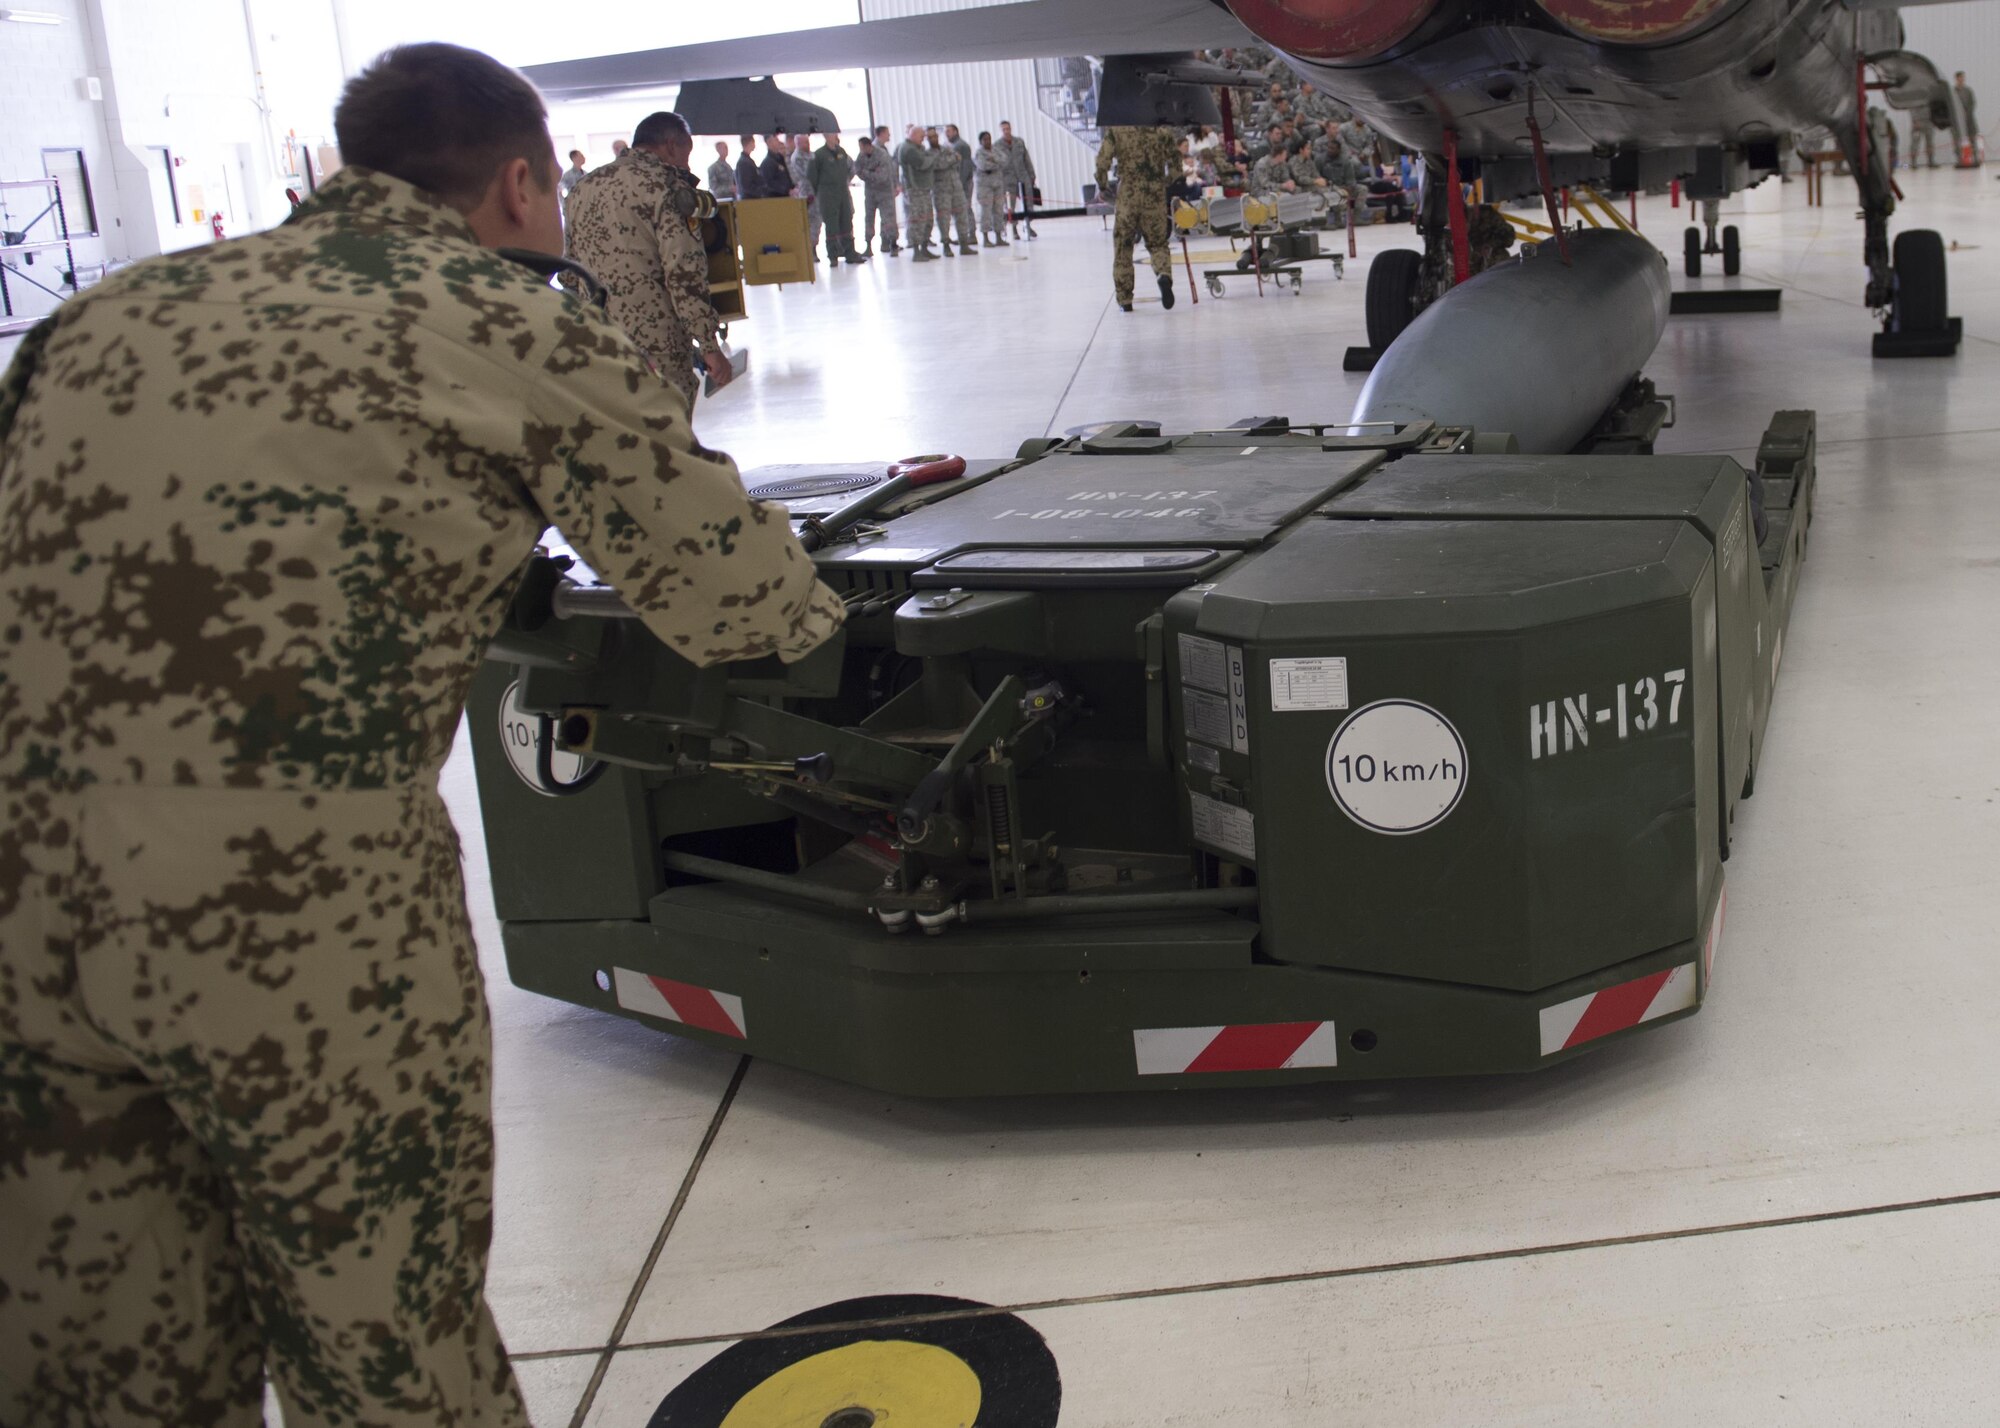 German Air Force Flying Training Center members load an inert munition onto a GAF Tornado during a quarterly load crew competition at Holloman Air Force Base, N.M., Jan. 20, 2016. The GAF competed for the last time in the load crew competition to have their skills evaluated alongside the MQ-9 Reaper and the F-16 Fighting Falcon load crews. Points for the competition are awarded based on weapons loading, tool kit inspection and uniform inspection categories. (U.S. Air Force photo by Senior Airman Chase Cannon/ Released)